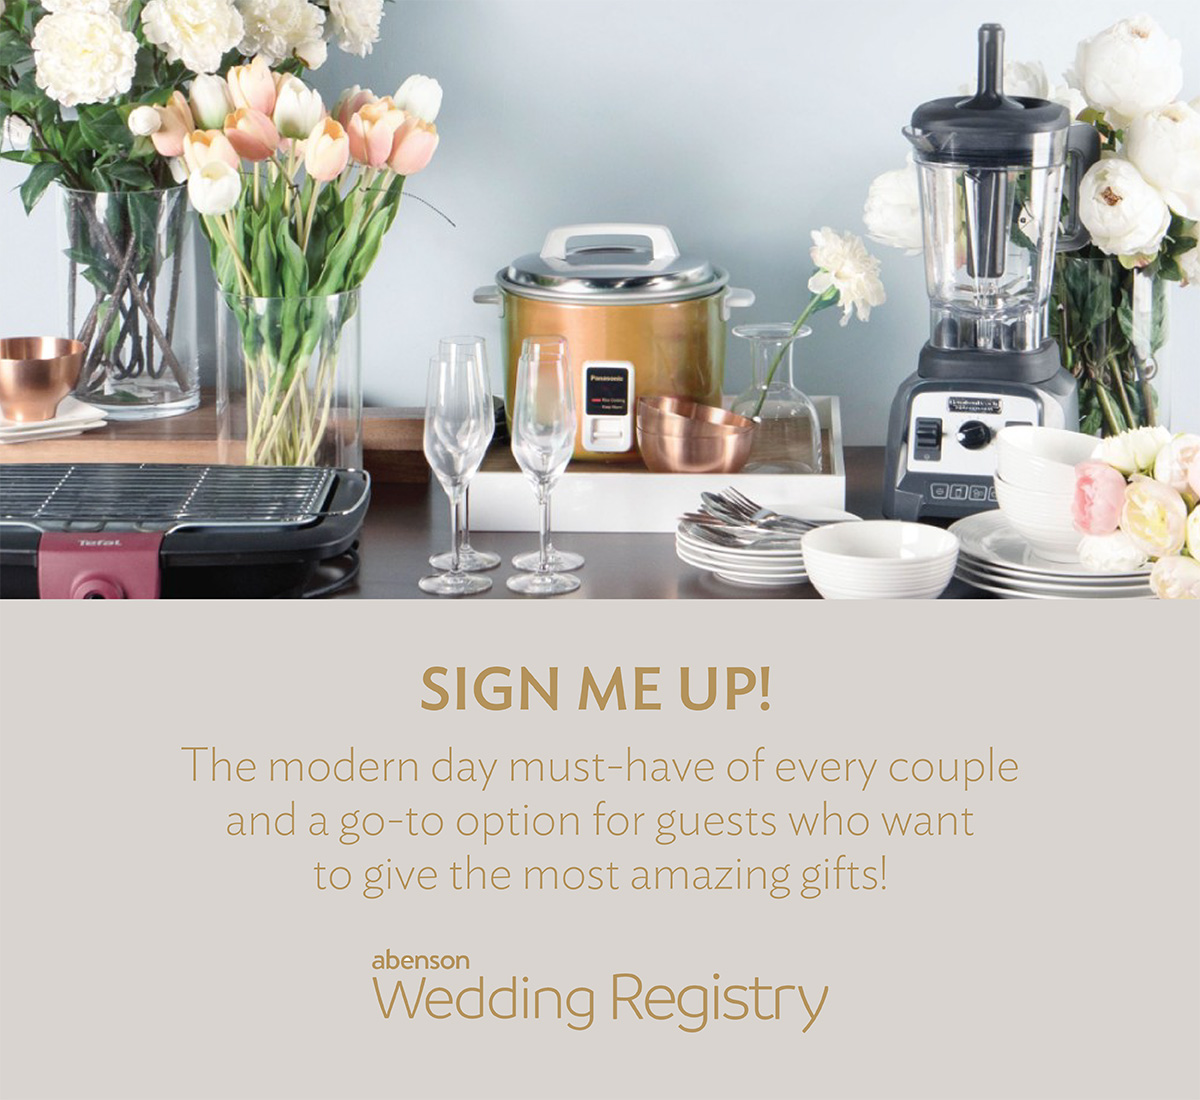 Sign me up! the modern day must-have of every couple and a go-to option for guests who want to give the most amazing gifts!